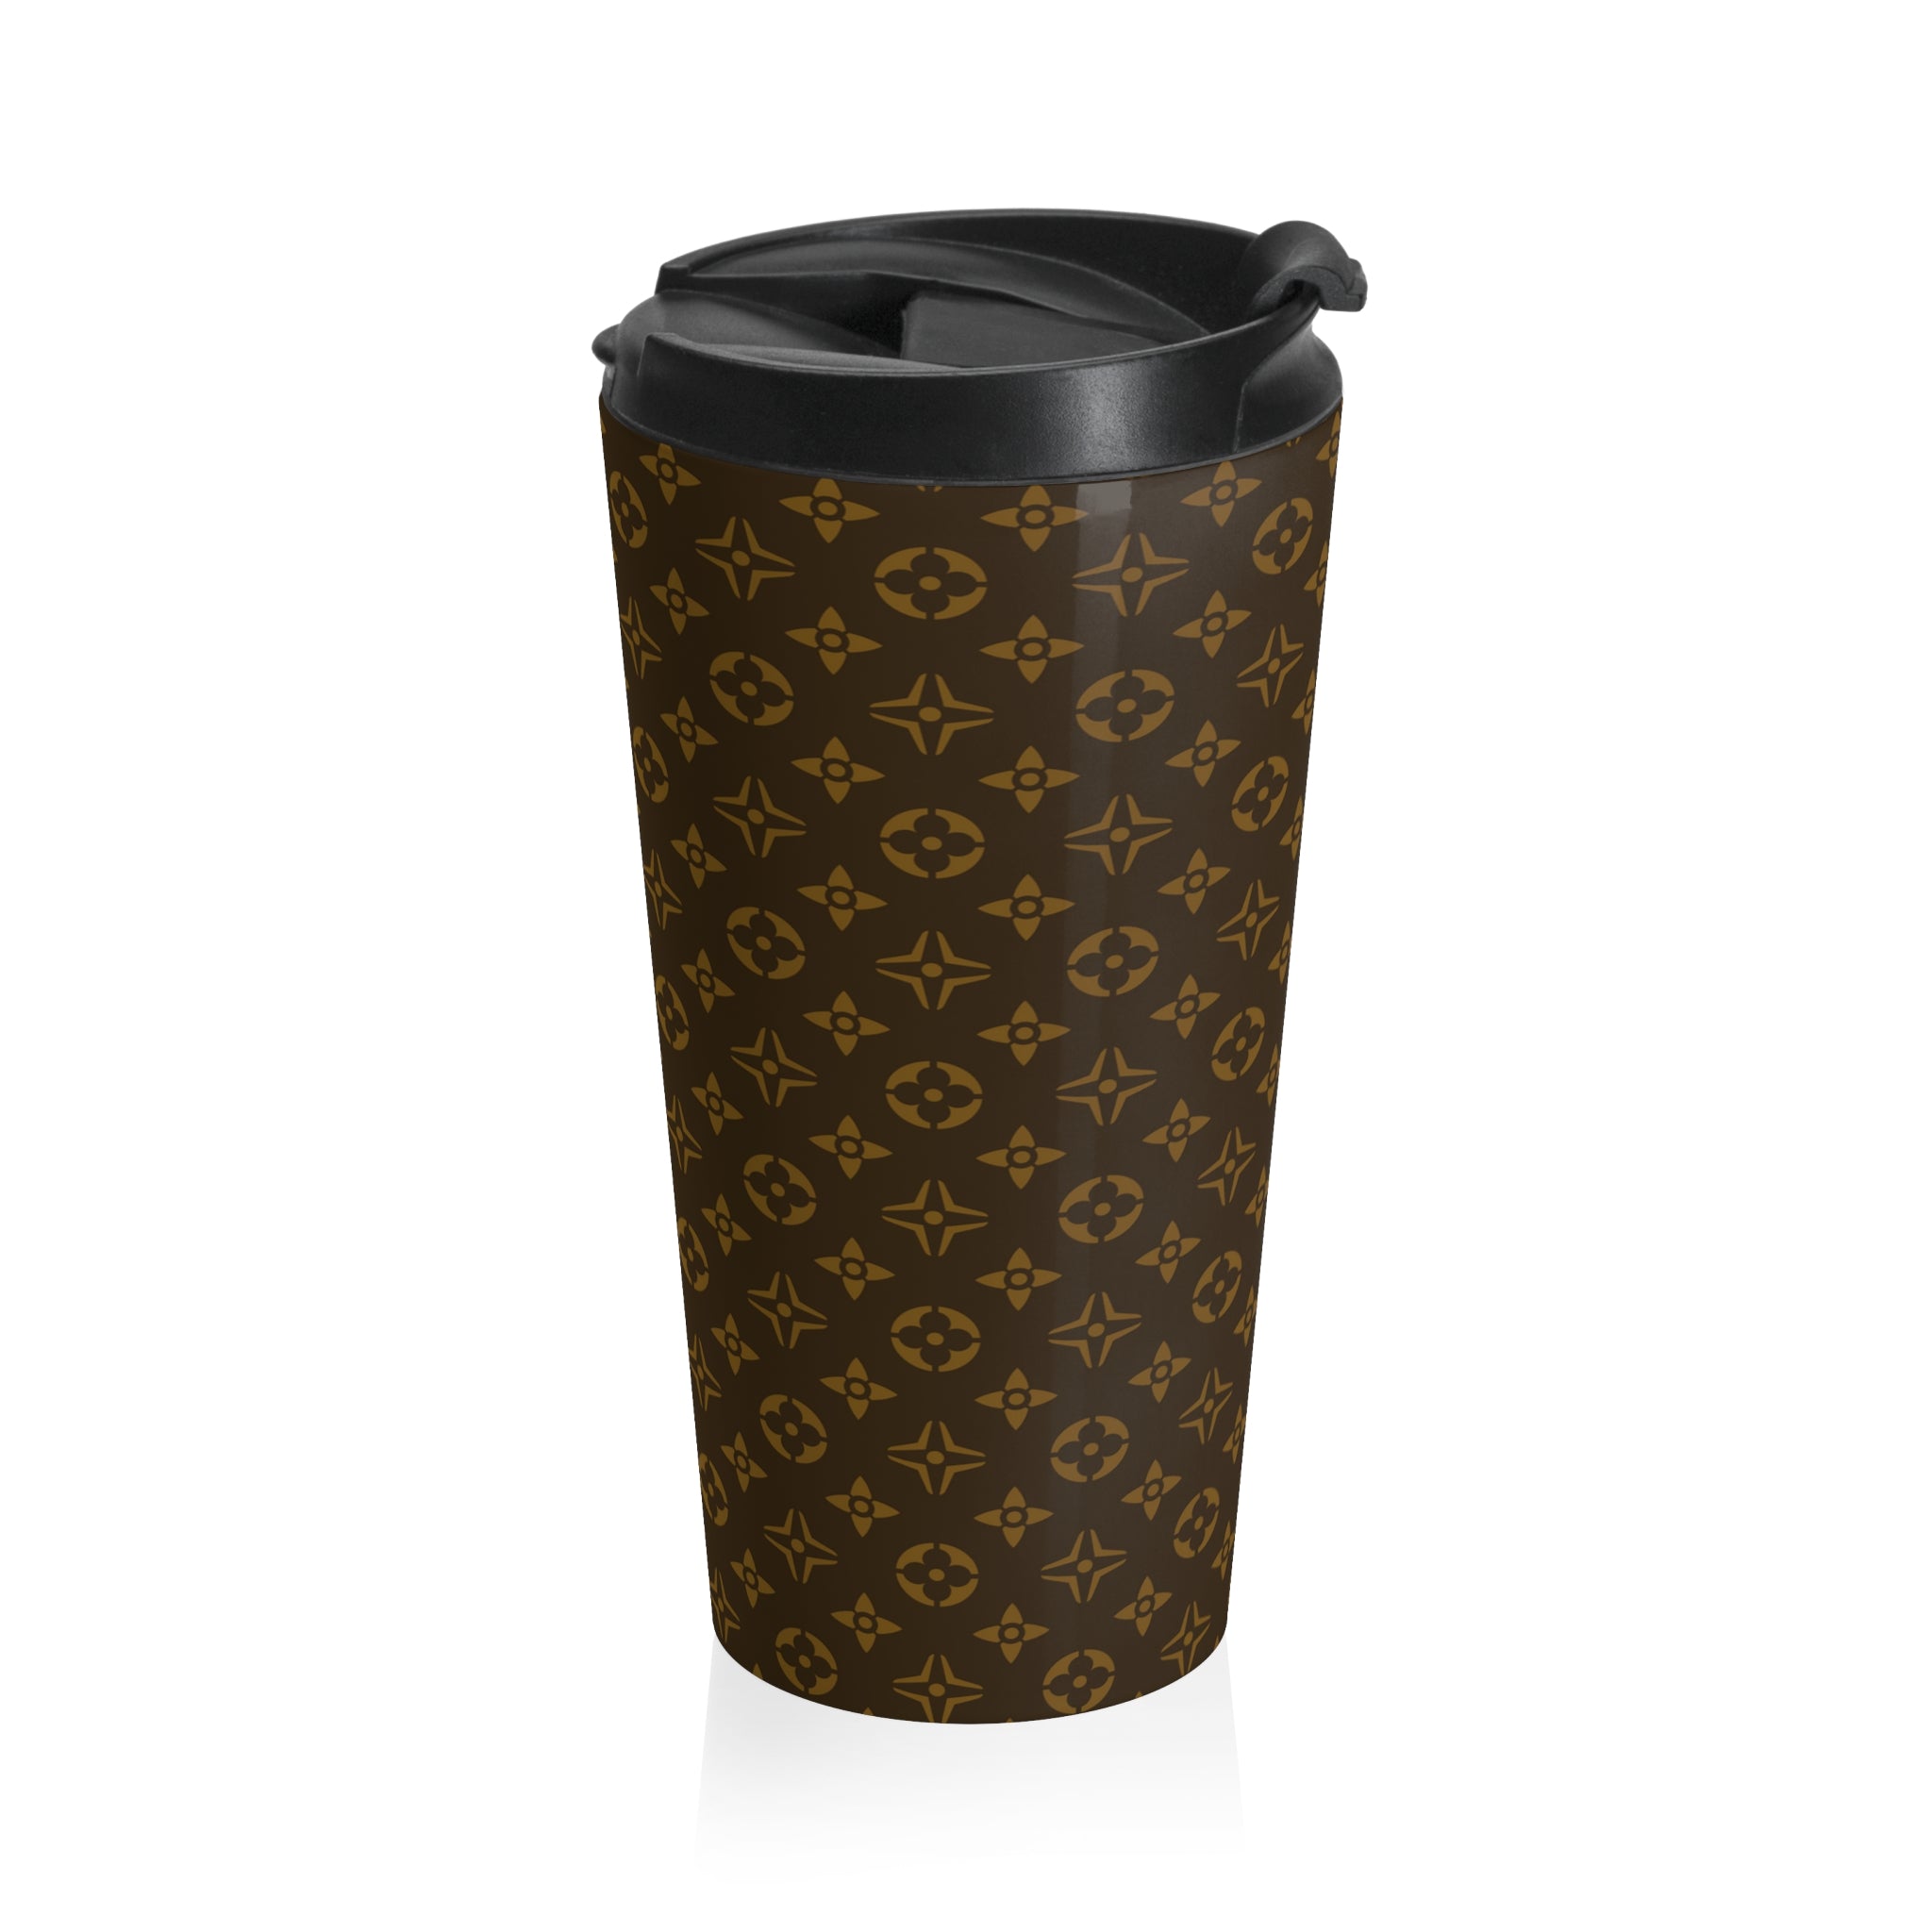  Brown and Gold Icons Stainless Steel Travel Mug, Patterned Coffee Cup, Cute Travel Mug, Stainless Steel Cup Travel Mug